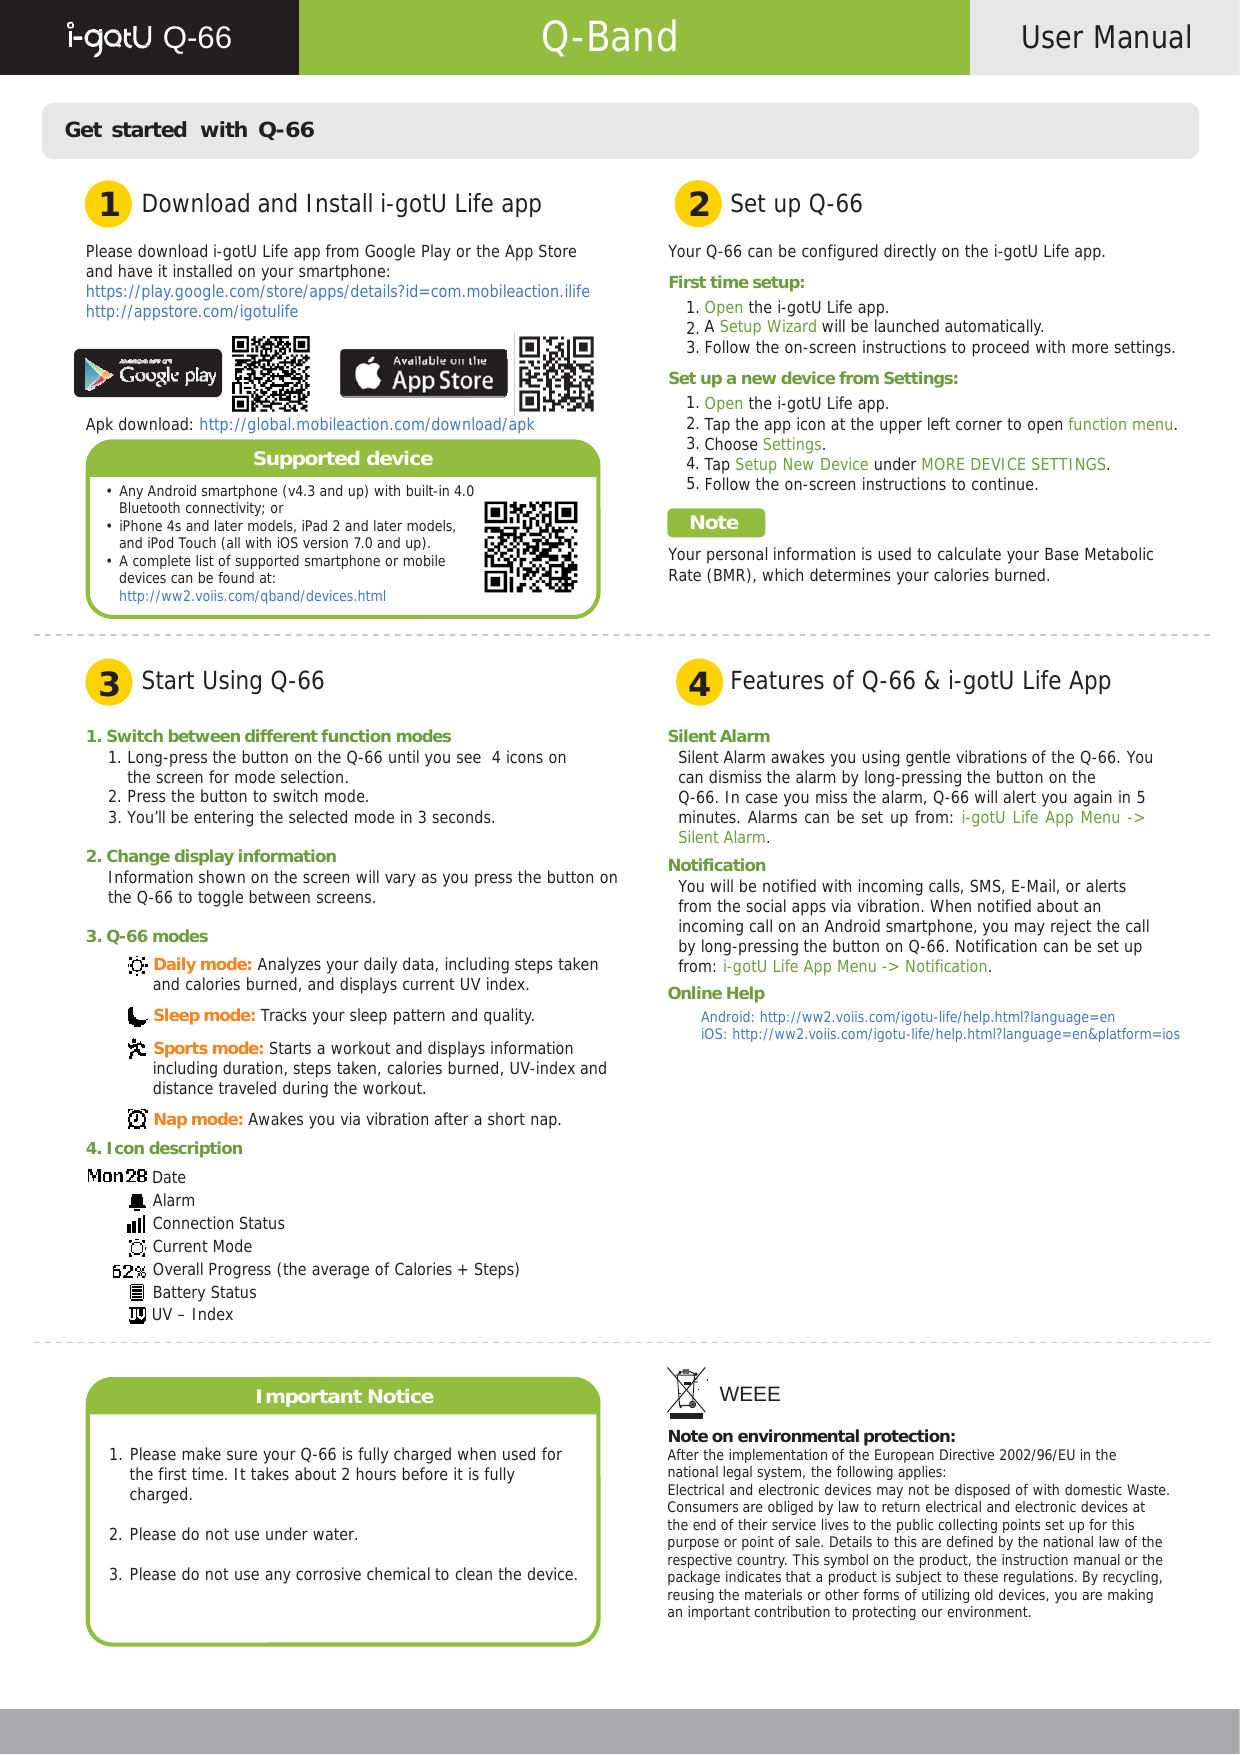      Q-66   Q-Band  User Manual    Get started  with Q-66   1  Download and Install i-gotU Life app 2  Set up Q-66  Please download i-gotU Life app from Google Play or the App Store and have it installed on your smartphone: https://play.google.com/store/apps/details?id=com.mobileaction.ilife http://appstore.com/igotulife     Apk download: http://global.mobileaction.com/download/apk  Supported device  • Any Android smartphone (v4.3 and up) with built-in 4.0 Bluetooth connectivity; or • iPhone 4s and later models, iPad 2 and later models, and iPod Touch (all with iOS version 7.0 and up). • A complete list of supported smartphone or mobile devices can be found at: http://ww2.voiis.com/qband/devices.html  Your Q-66 can be configured directly on the i-gotU Life app.  First time setup: 1. Open the i-gotU Life app. 2. A Setup Wizard will be launched automatically. 3. Follow the on-screen instructions to proceed with more settings.  Set up a new device from Settings: 1. Open the i-gotU Life app. 2. Tap the app icon at the upper left corner to open function menu. 3. Choose Settings. 4. Tap Setup New Device under MORE DEVICE SETTINGS. 5. Follow the on-screen instructions to continue.  Note  Your personal information is used to calculate your Base Metabolic Rate (BMR), which determines your calories burned.    3  Start Using Q-66 4  Features of Q-66 &amp; i-gotU Life App  1. Switch between different function modes 1. Long-press the button on the Q-66 until you see  4 icons on the screen for mode selection. 2. Press the button to switch mode. 3. You’ll be entering the selected mode in 3 seconds.  2. Change display information Information shown on the screen will vary as you press the button on the Q-66 to toggle between screens.  3. Q-66 modes  Daily mode: Analyzes your daily data, including steps taken and calories burned, and displays current UV index.  Sleep mode: Tracks your sleep pattern and quality.   Sports mode: Starts a workout and displays information including duration, steps taken, calories burned, UV-index and distance traveled during the workout.  Nap mode: Awakes you via vibration after a short nap. 4. Icon description  Date Alarm Connection Status Current Mode Overall Progress (the average of Calories + Steps) Battery Status  UV – Index    Important Notice   1. Please make sure your Q-66 is fully charged when used for the first time. It takes about 2 hours before it is fully charged.  2. Please do not use under water.  3. Please do not use any corrosive chemical to clean the device. Silent Alarm Silent Alarm awakes you using gentle vibrations of the Q-66. You can dismiss the alarm by long-pressing the button on the Q-66. In case you miss the alarm, Q-66 will alert you again in 5 minutes. Alarms can be set up from: i-gotU Life App Menu -&gt; Silent Alarm. Notification You will be notified with incoming calls, SMS, E-Mail, or alerts from the social apps via vibration. When notified about an incoming call on an Android smartphone, you may reject the call by long-pressing the button on Q-66. Notification can be set up from: i-gotU Life App Menu -&gt; Notification. Online Help Android: http://ww2.voiis.com/igotu-life/help.html?language=en iOS: http://ww2.voiis.com/igotu-life/help.html?language=en&amp;platform=ios              WEEE  Note on environmental protection: After the implementation of the European Directive 2002/96/EU in the national legal system, the following applies: Electrical and electronic devices may not be disposed of with domestic Waste. Consumers are obliged by law to return electrical and electronic devices at the end of their service lives to the public collecting points set up for this purpose or point of sale. Details to this are defined by the national law of the respective country. This symbol on the product, the instruction manual or the package indicates that a product is subject to these regulations. By recycling, reusing the materials or other forms of utilizing old devices, you are making an important contribution to protecting our environment.